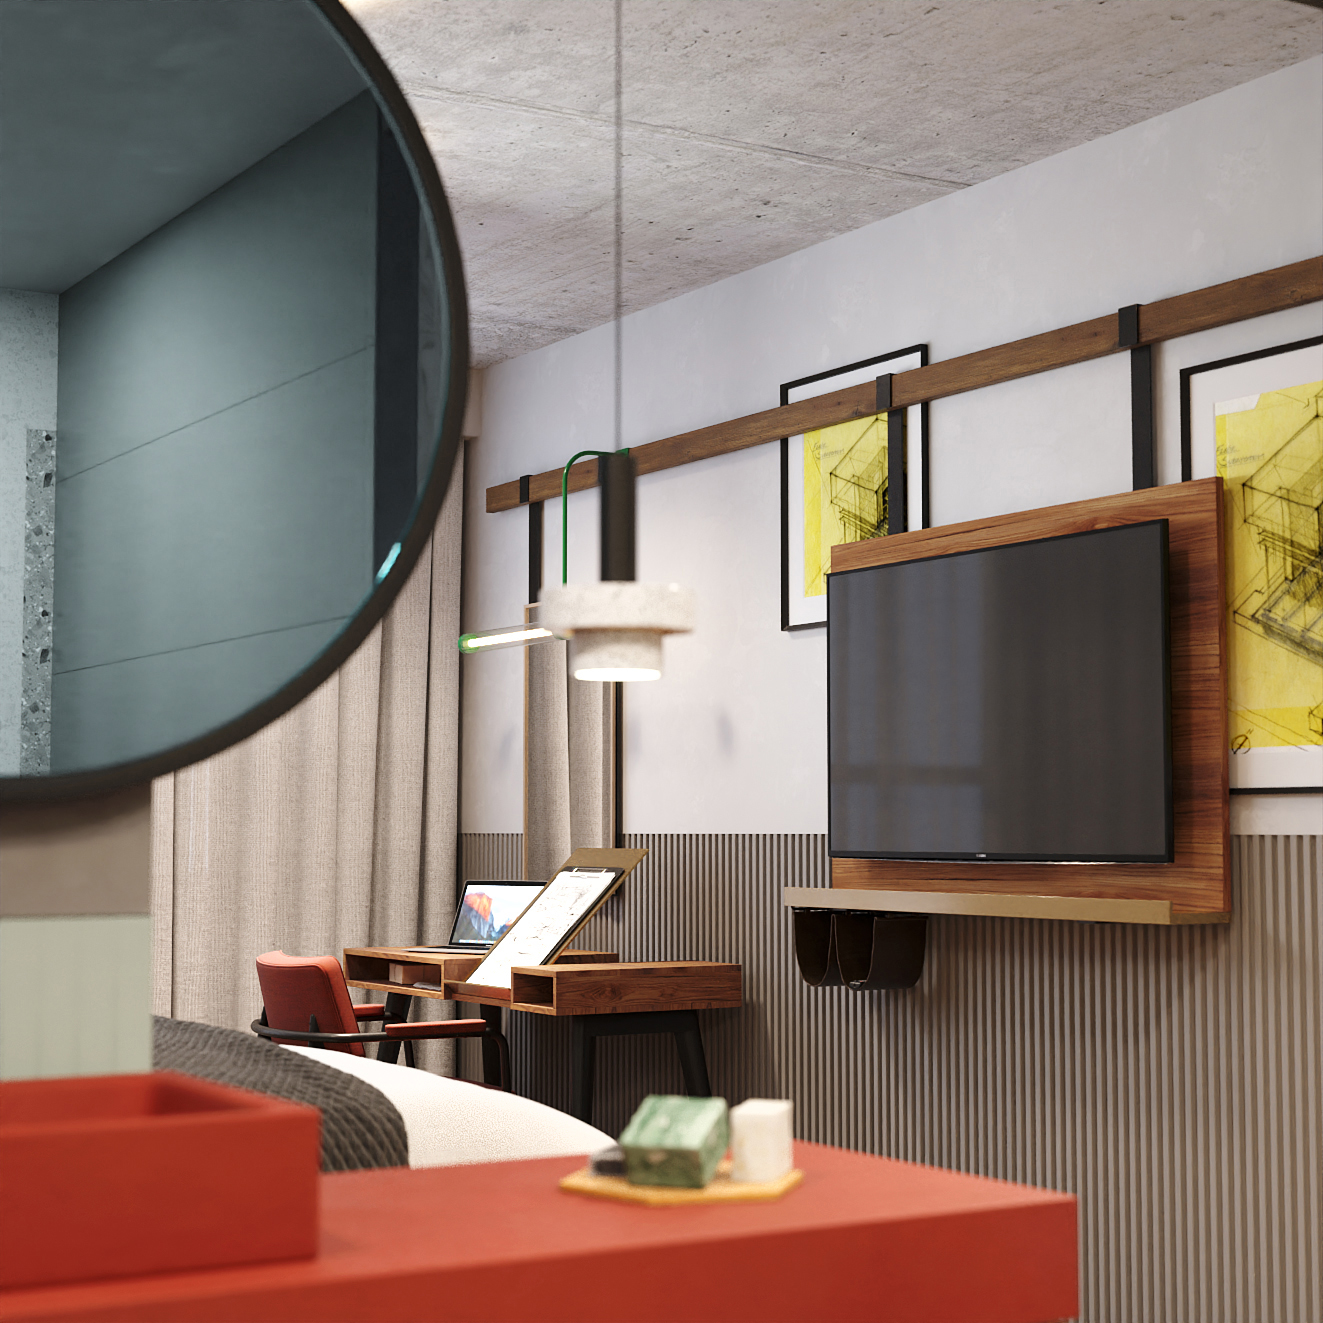 Hotel bedroom space designed as workspace featuring a hanging screen, 3D model concept for Indigo Hotel, IHG Hotels and resorts, made by 3Stories interior design